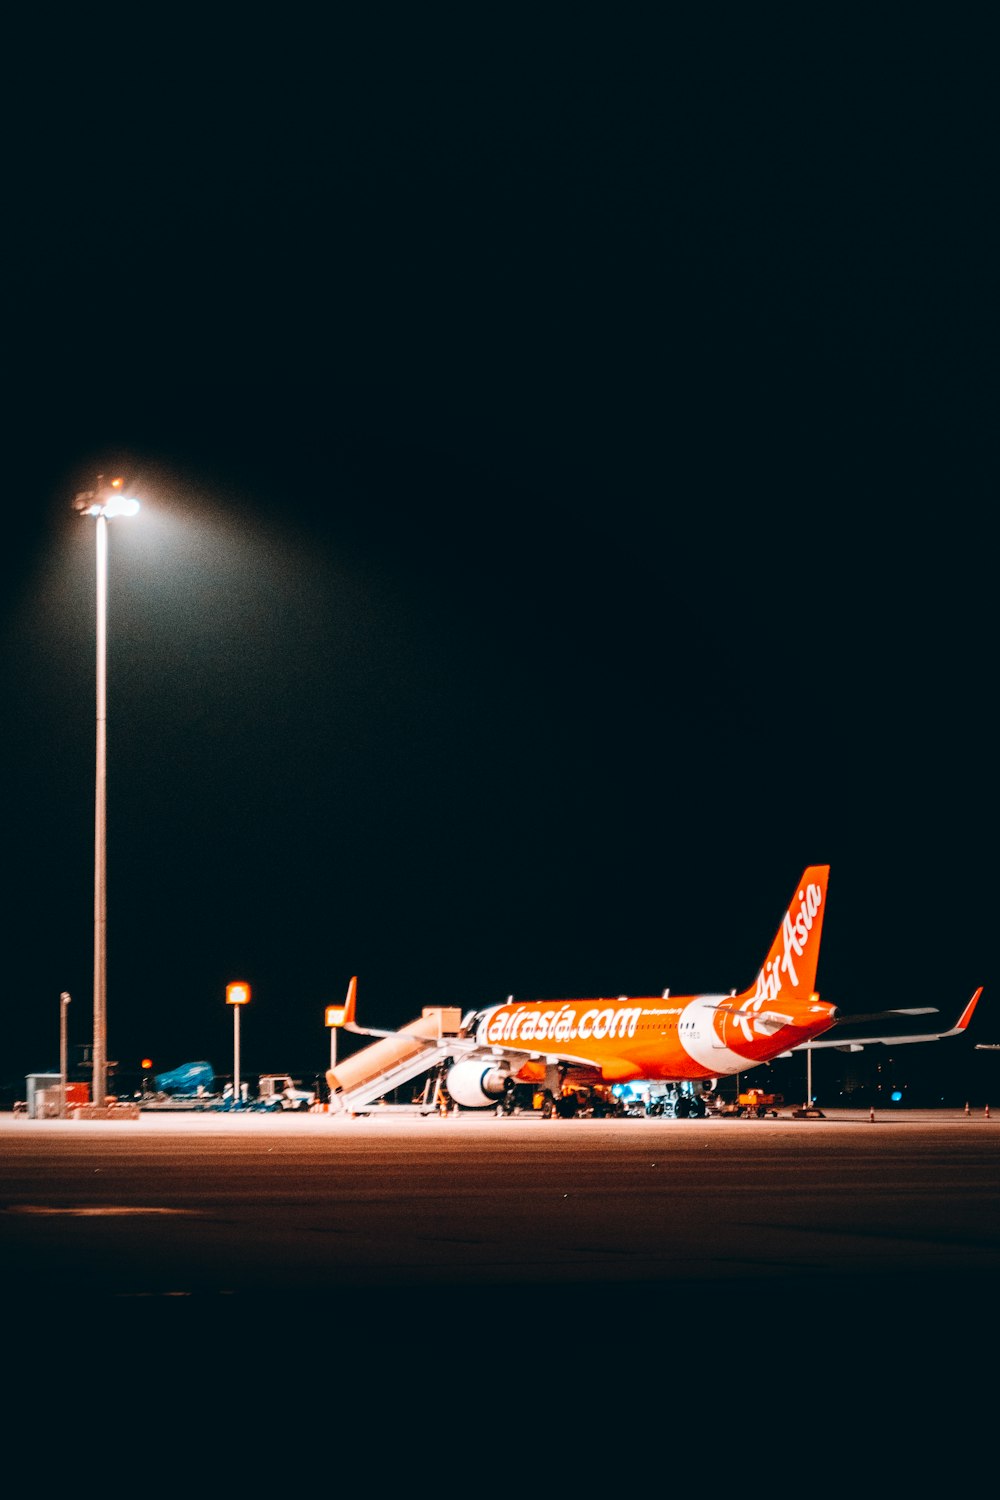 an orange and white airplane parked at an airport